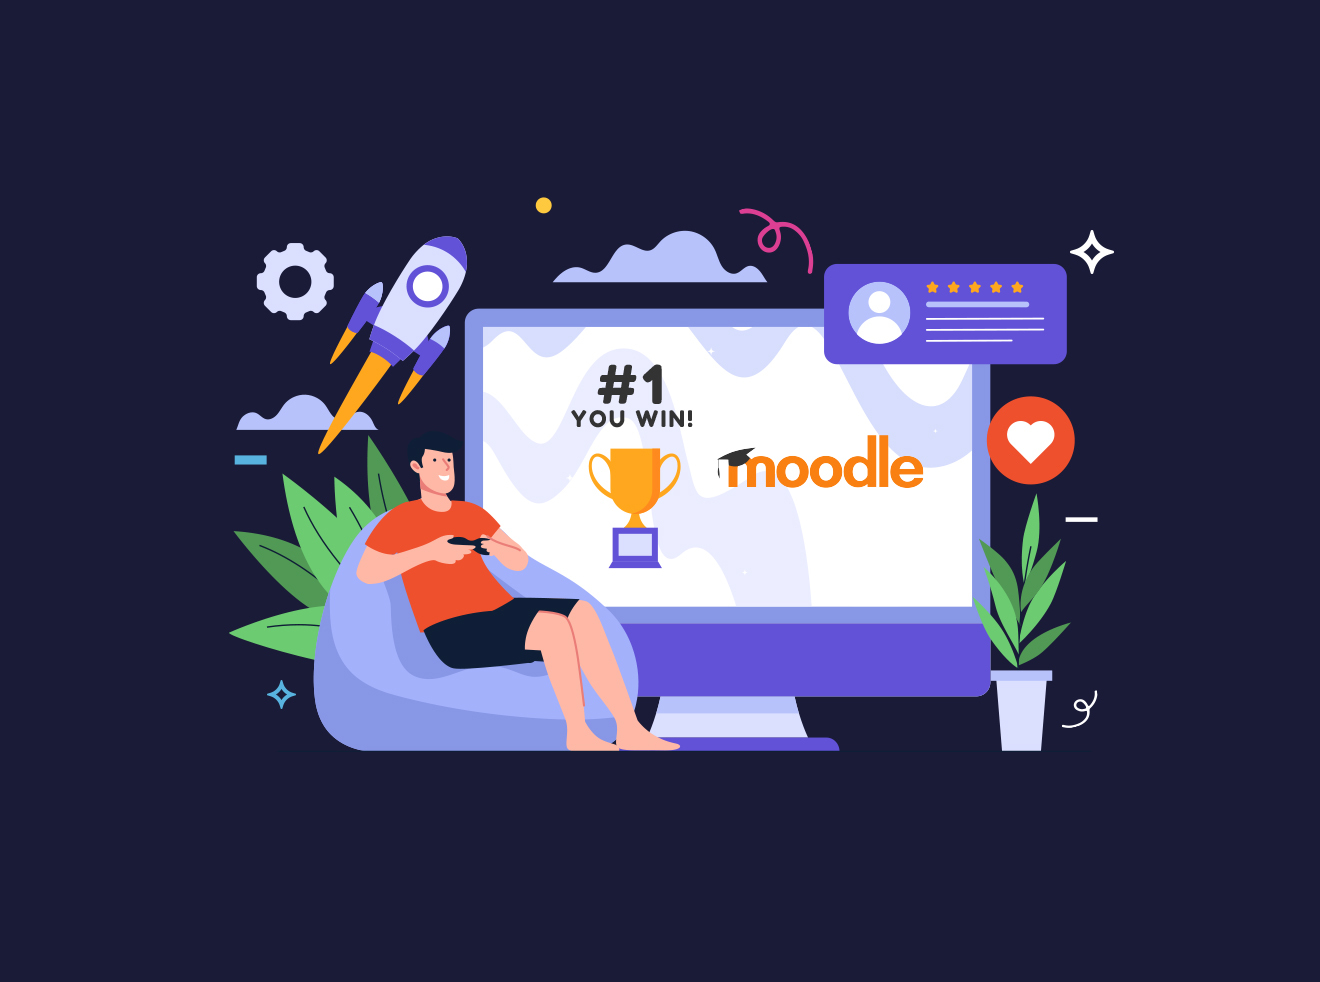 moodle gamification